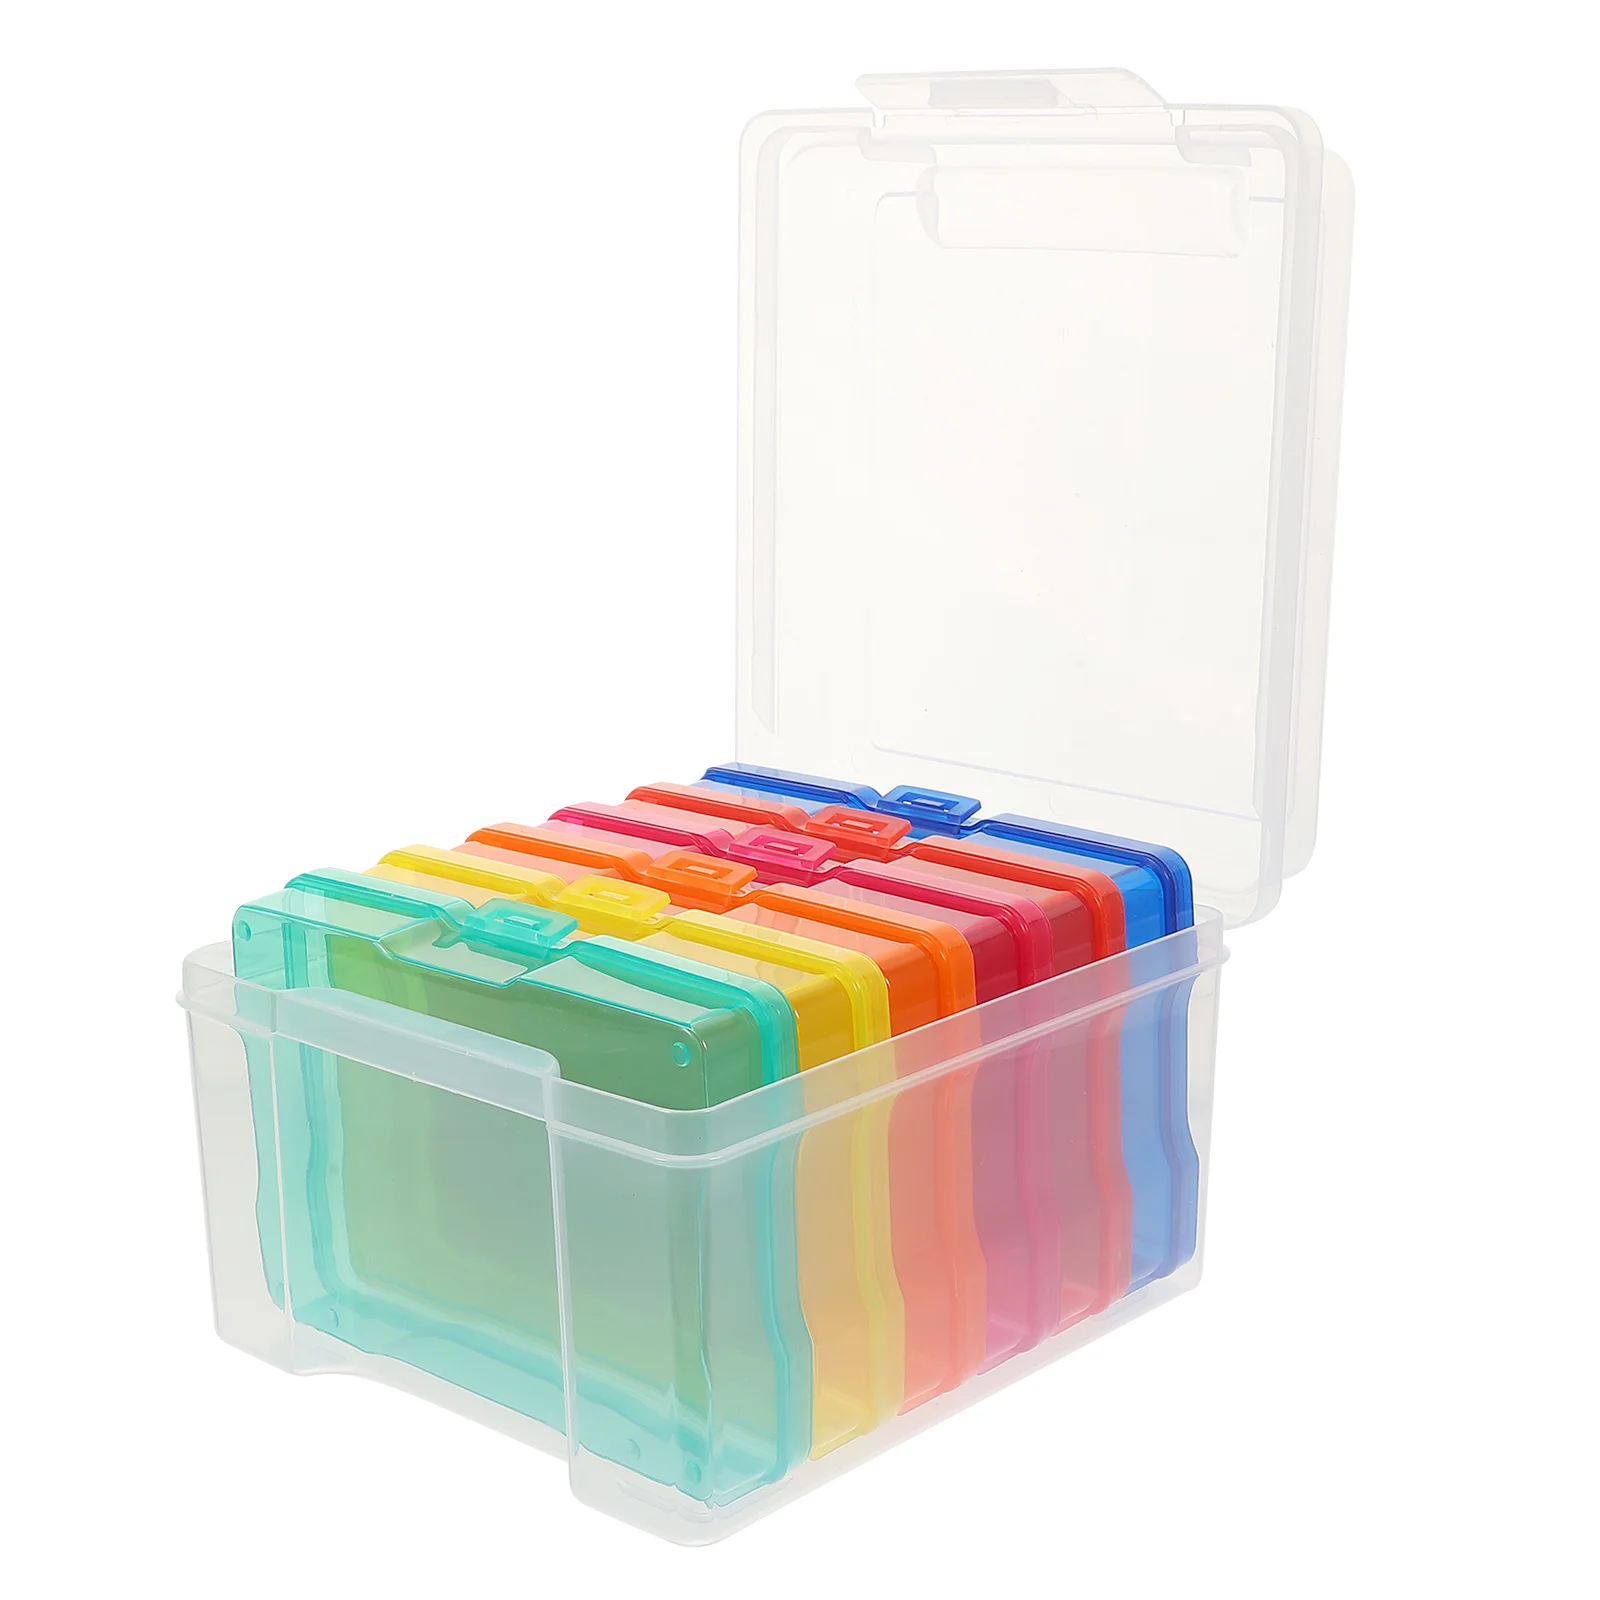 

Box Photo Storage Boxes Organizer Case Keeper Containers Photos Greeting Task Special Education Organizers Craft Holder